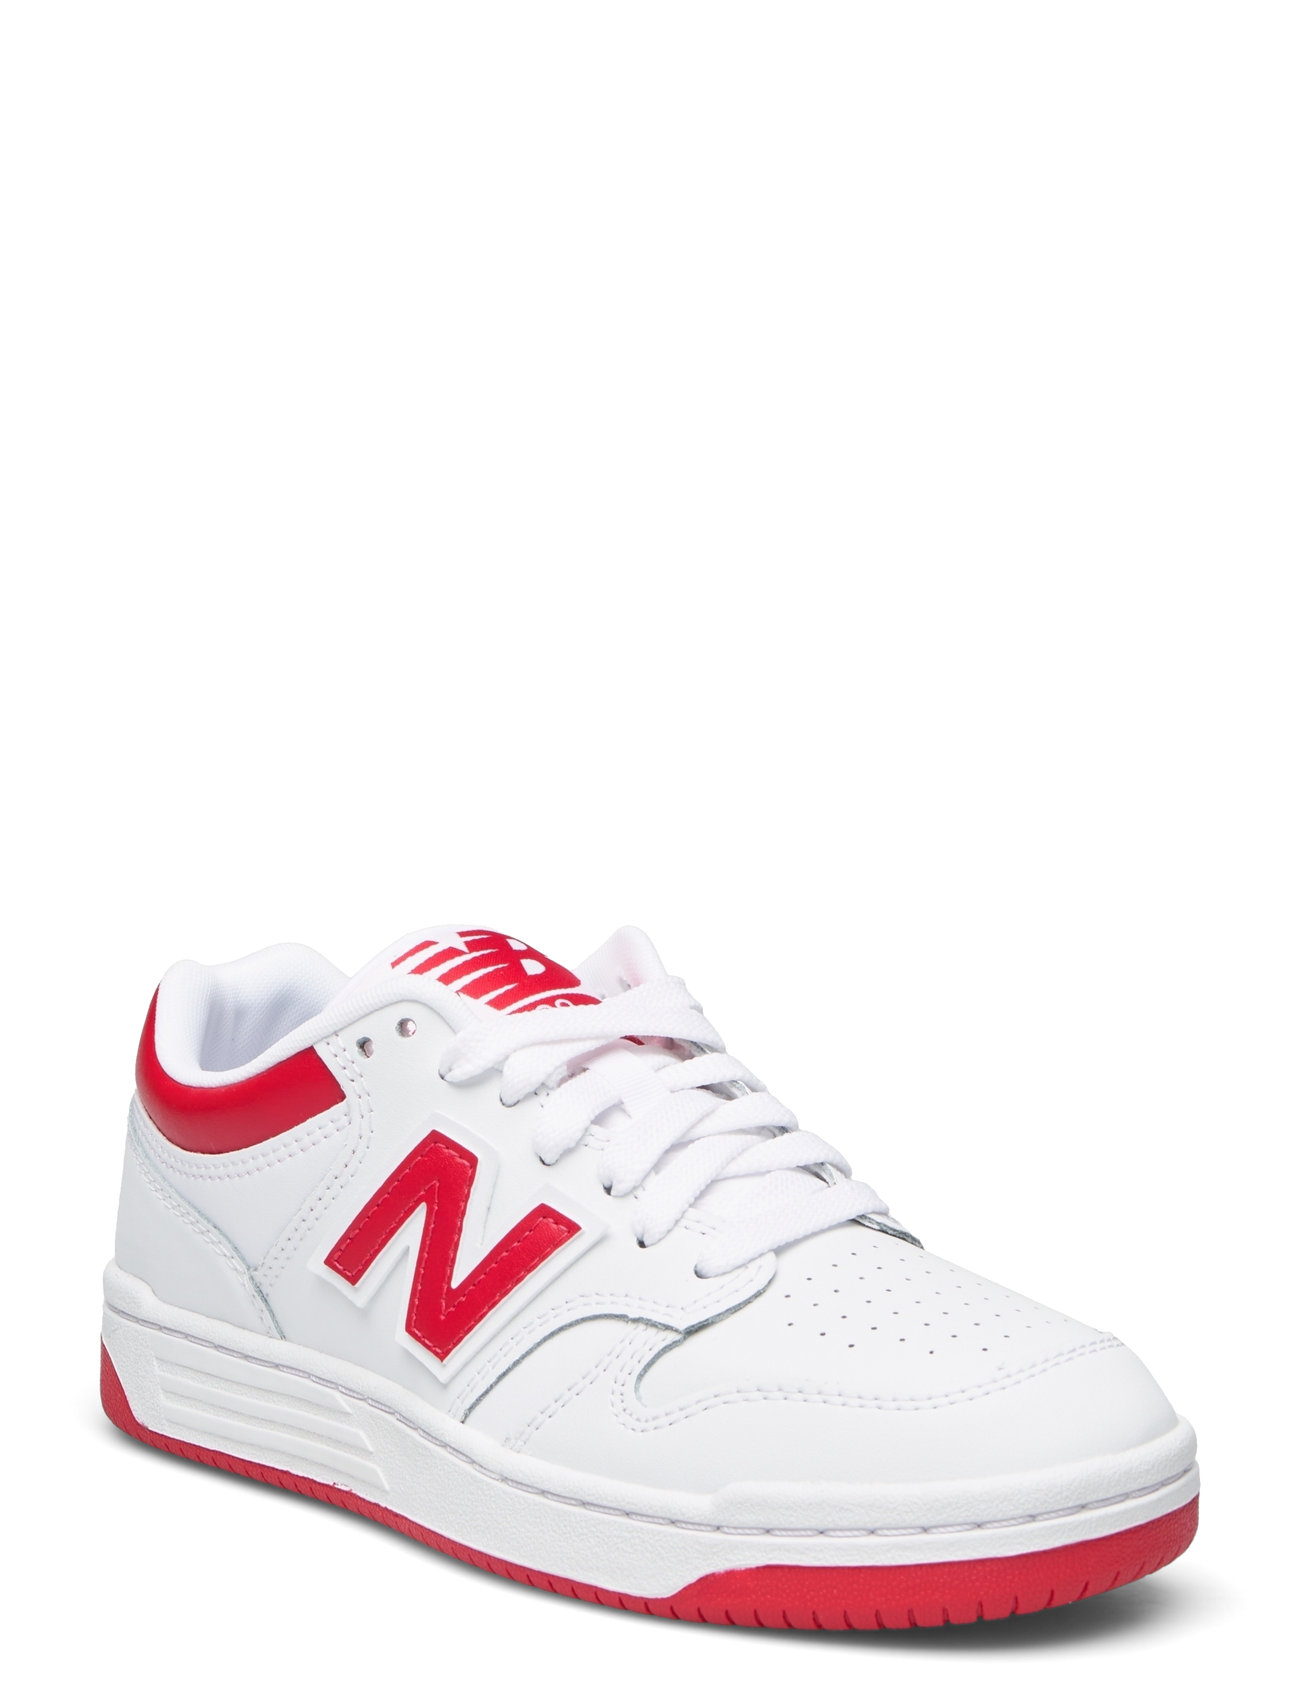 New Balance Bb480 Sport Sneakers Low-top Sneakers White New Balance